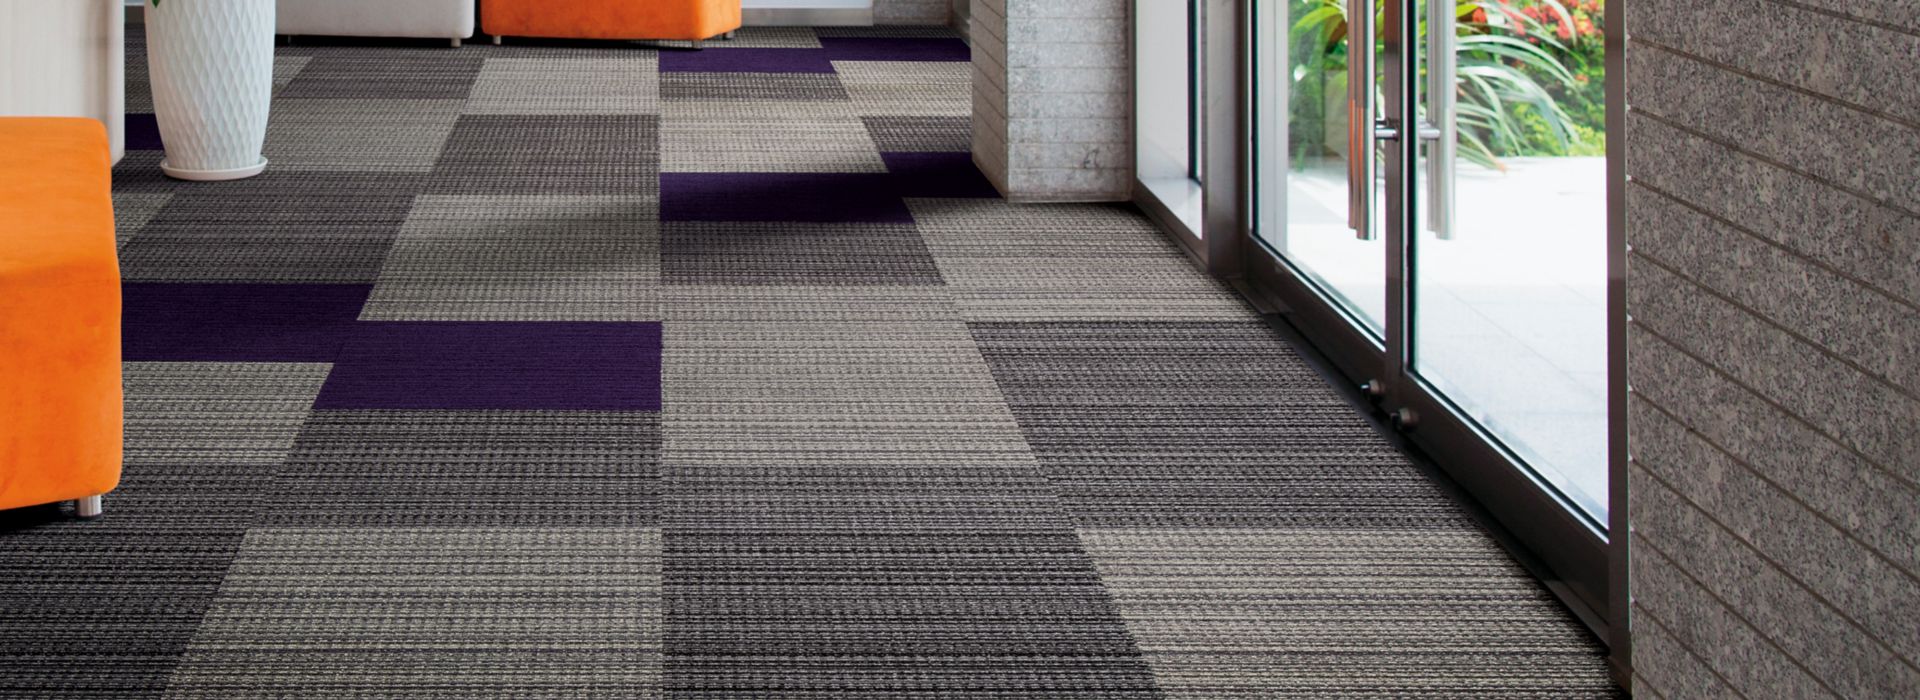 Interface La Paz and Viva Colores carpet tile in entrance area with plant and natural light